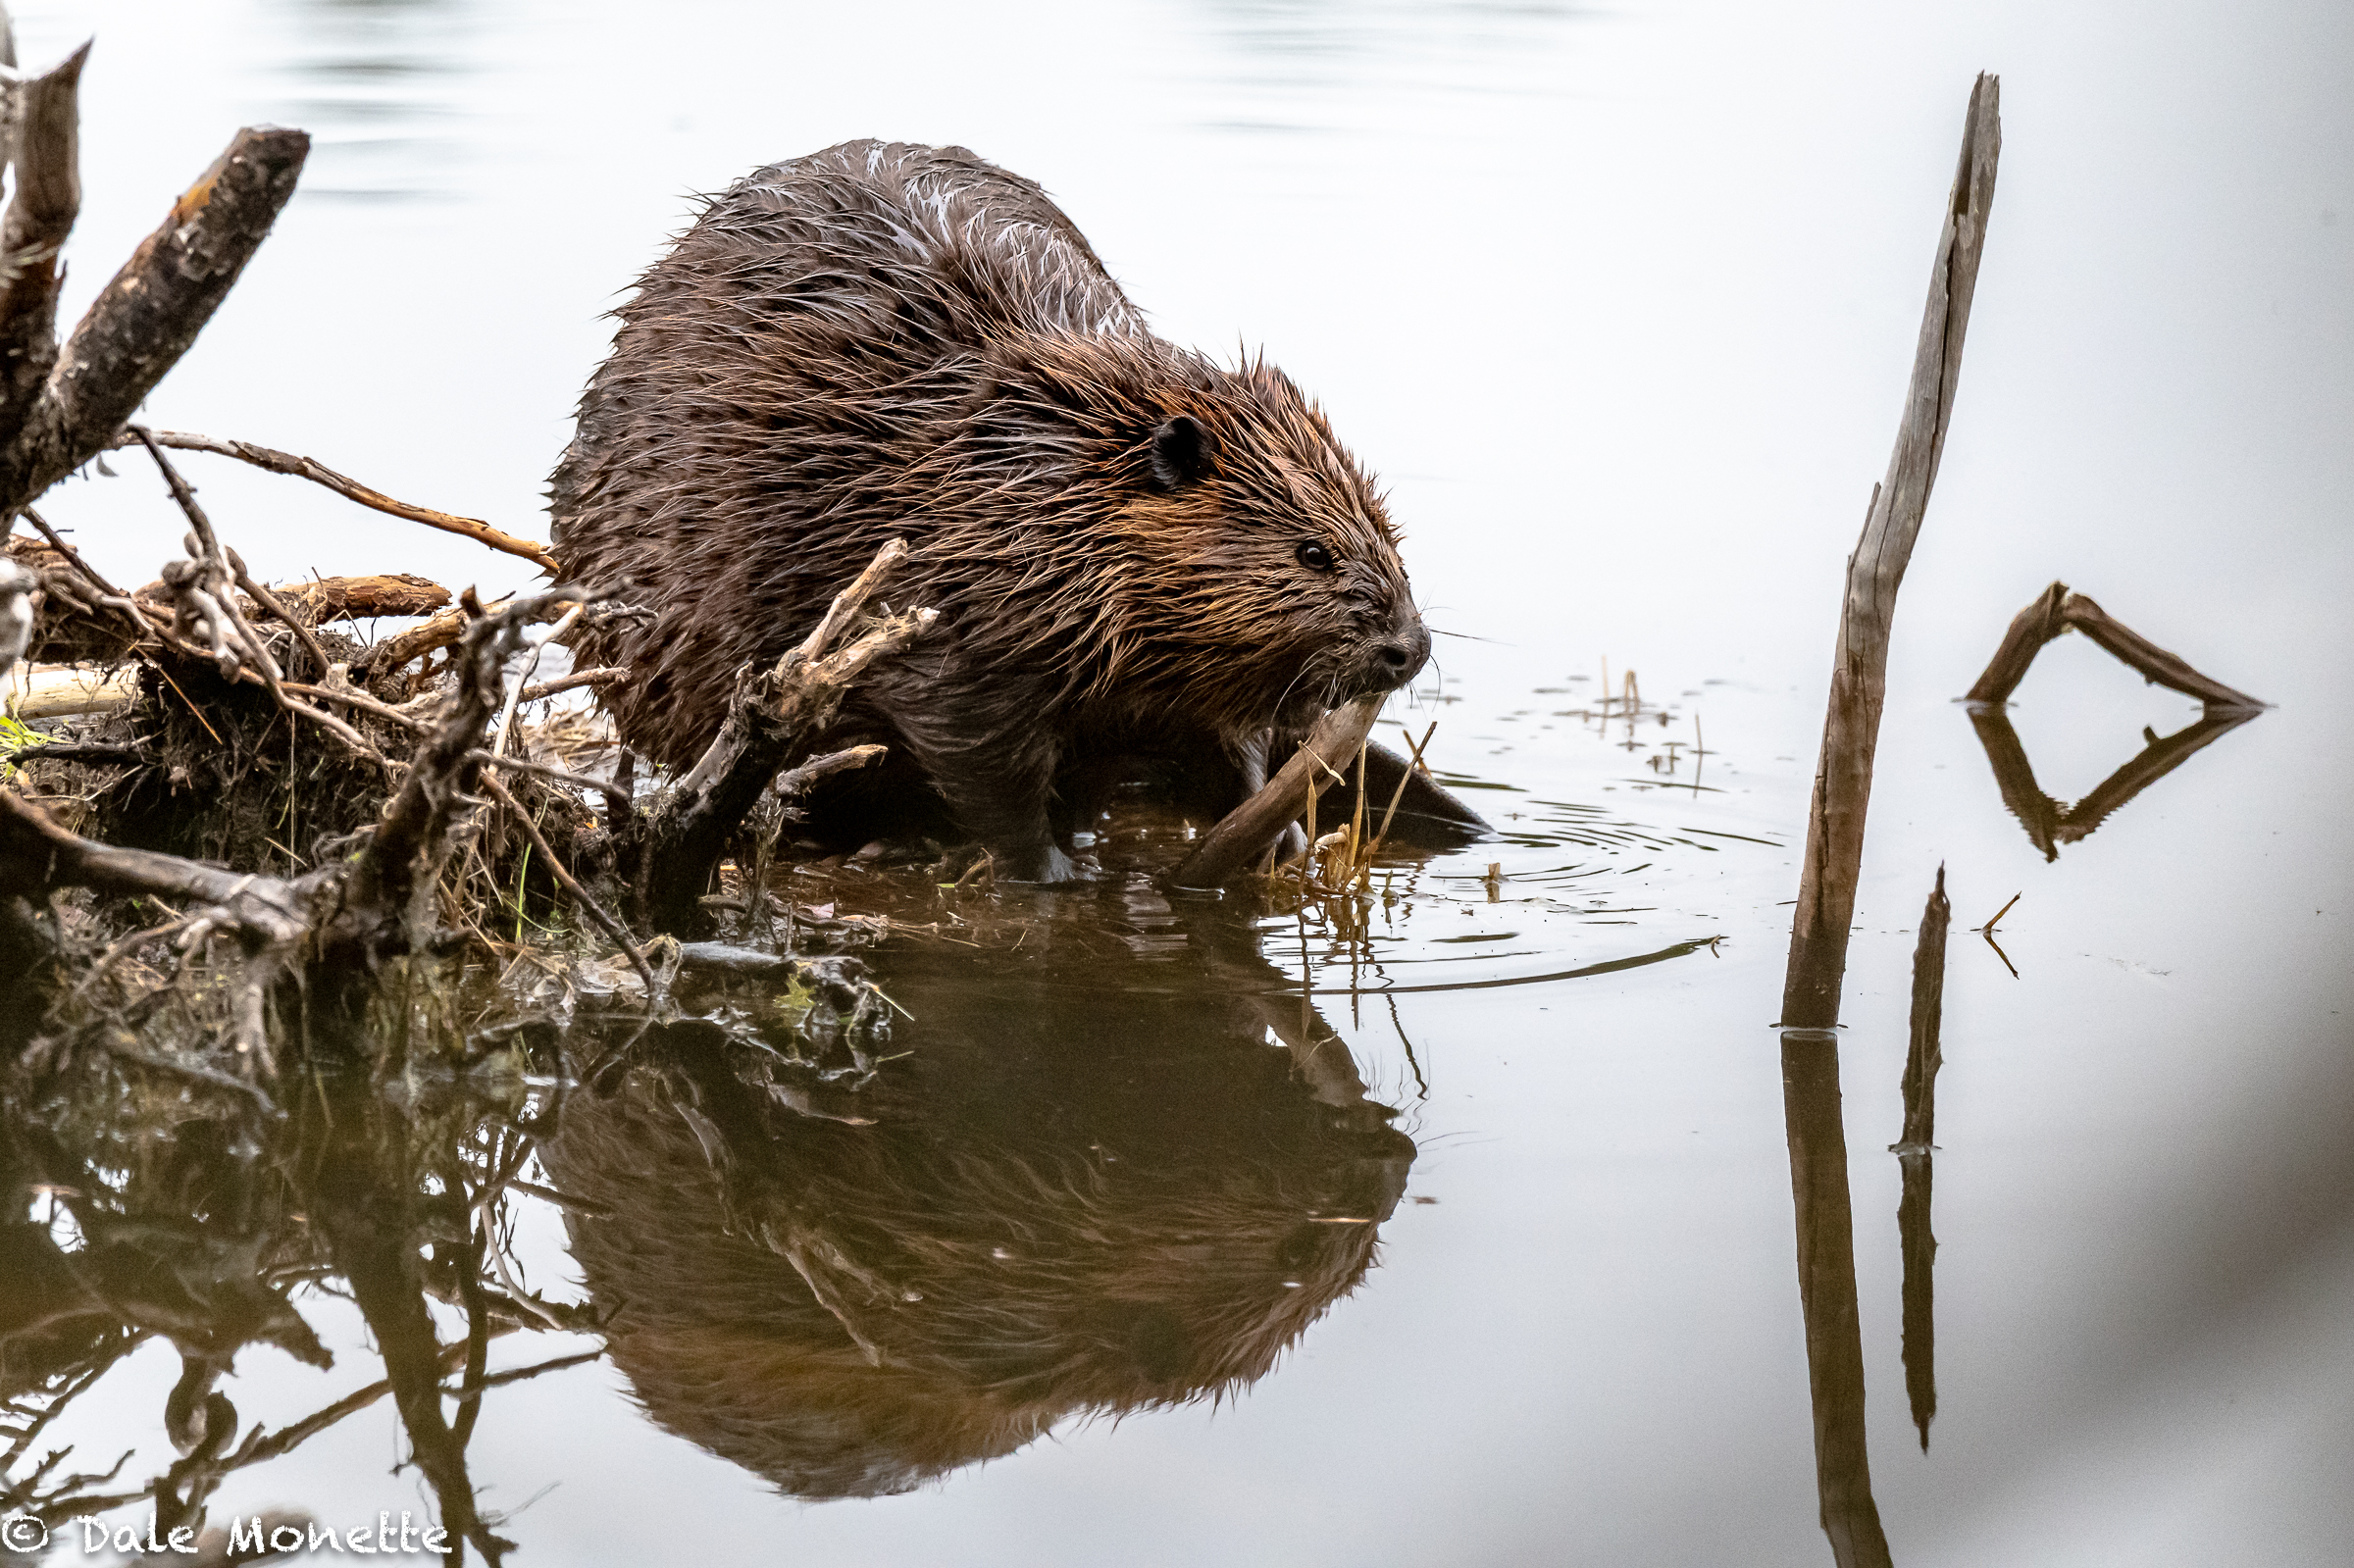   A quick hike in the rain into a favorite beaver pond this morning produced this guy eating a snack before retiring to the lodge today.    